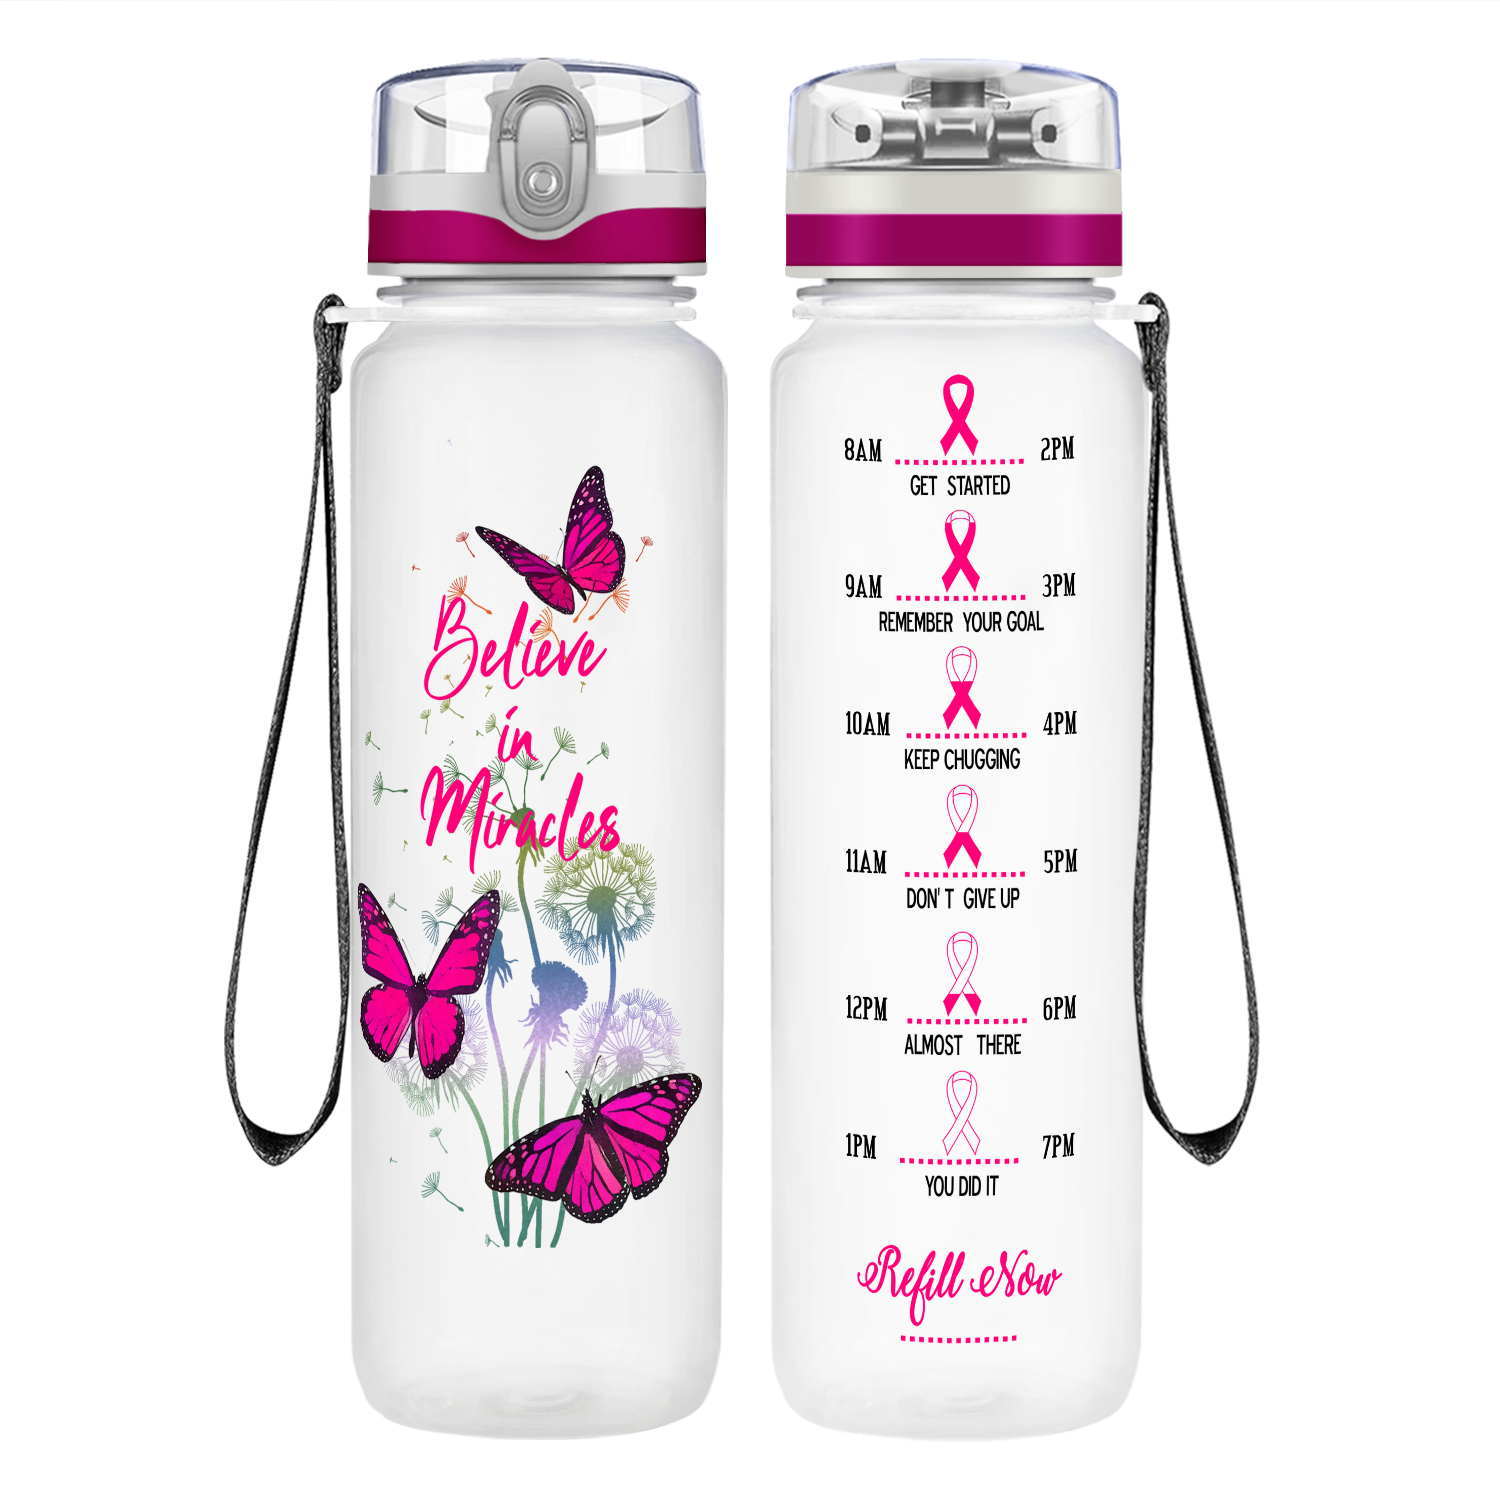 Believe in Miracles on 32 oz Motivational Tracking Breast Cancer Awareness Water Bottle